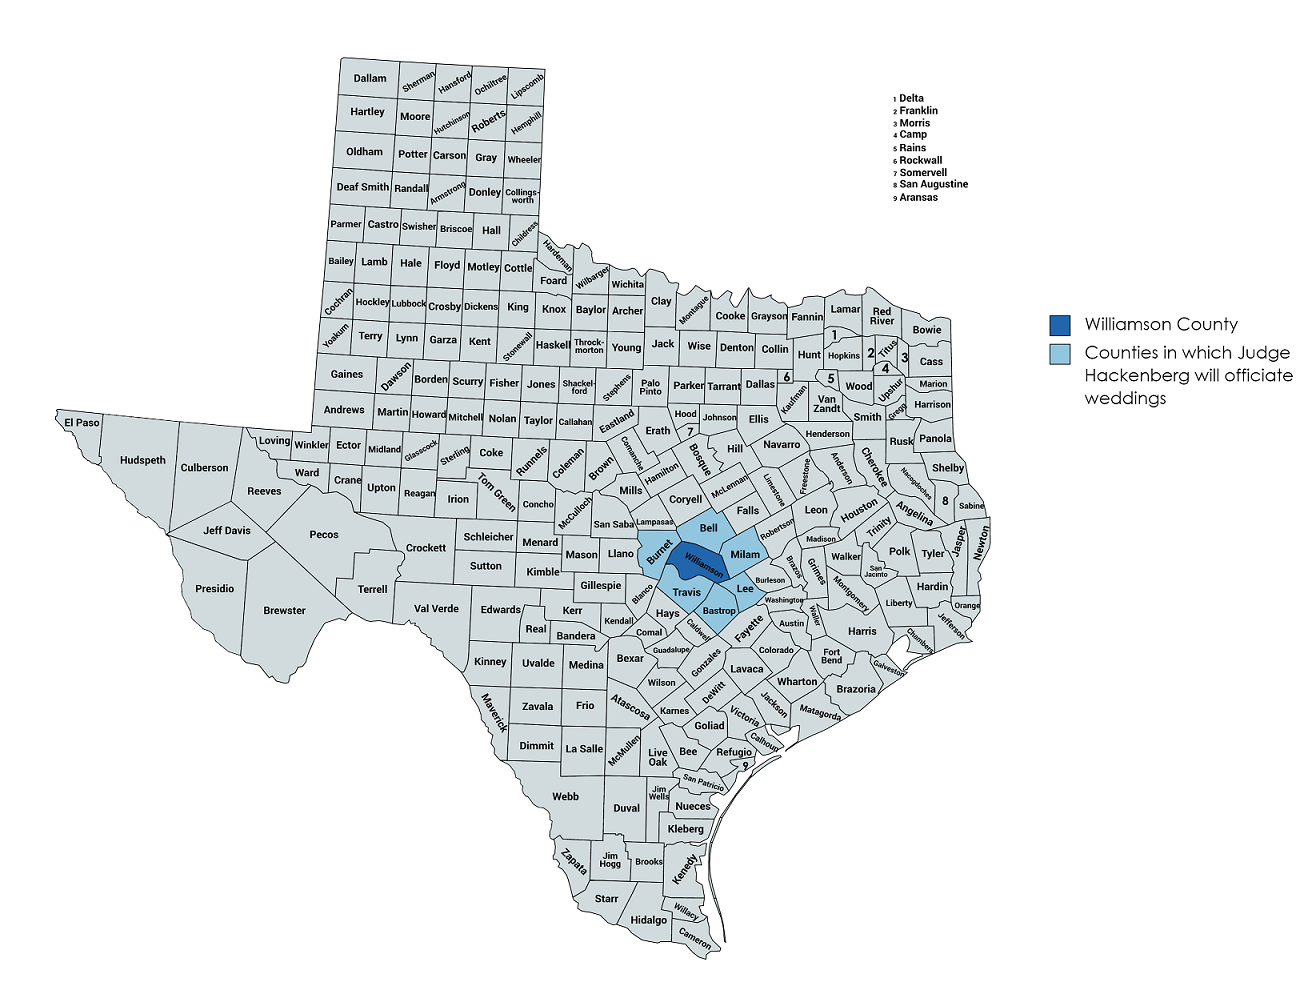 The Texas Counties in which Judge Hackenberg will perform weddings